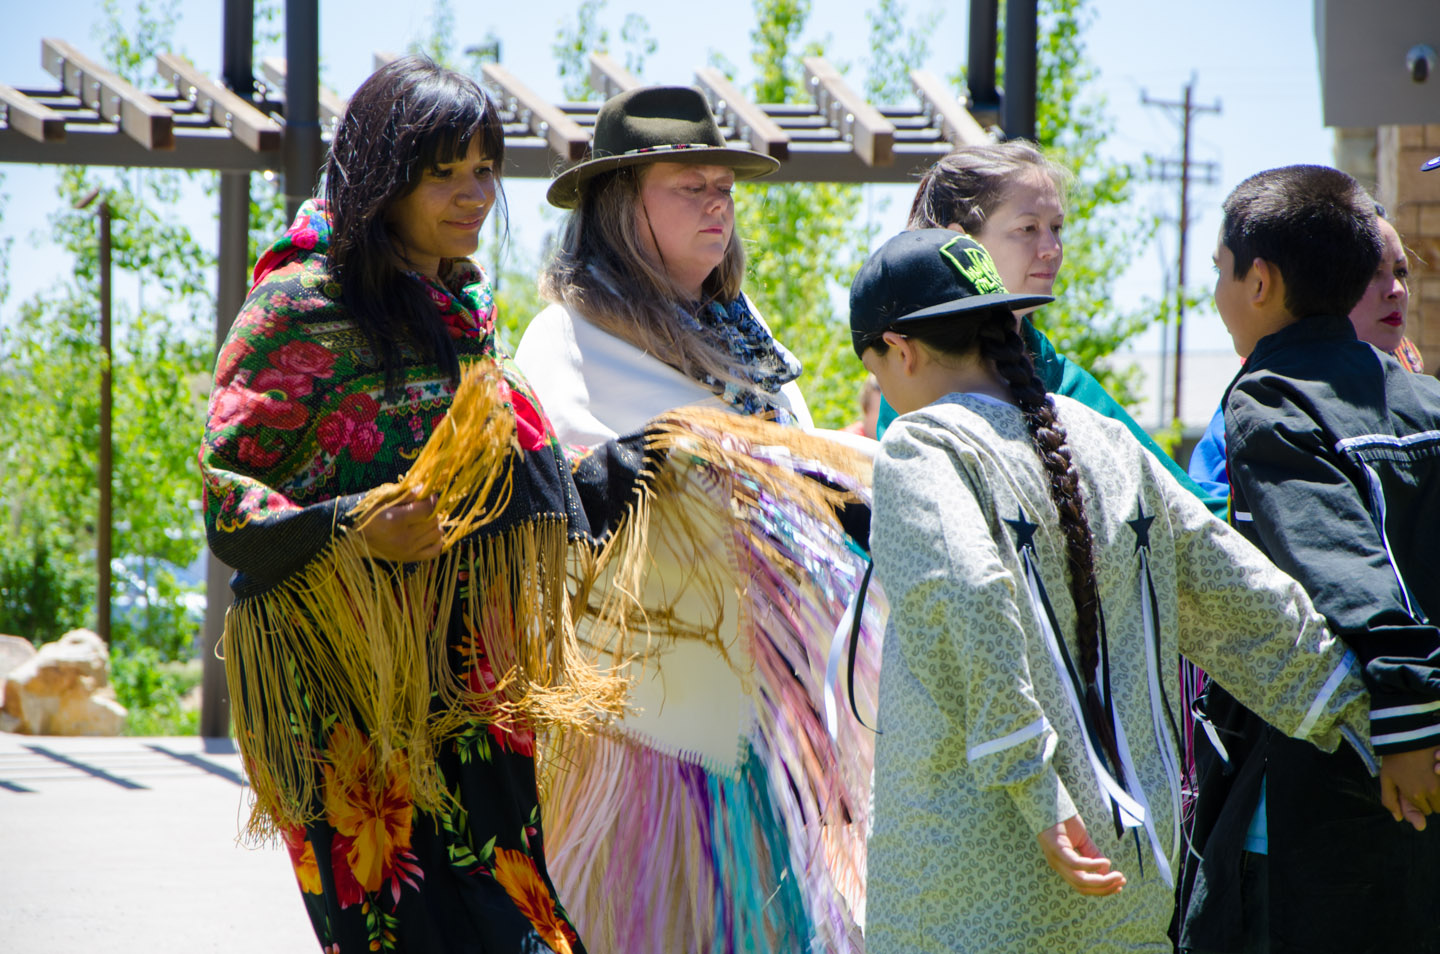 Bear Dancers line dance outside of the Southern Ute Cultural Center & Museum during the filming.